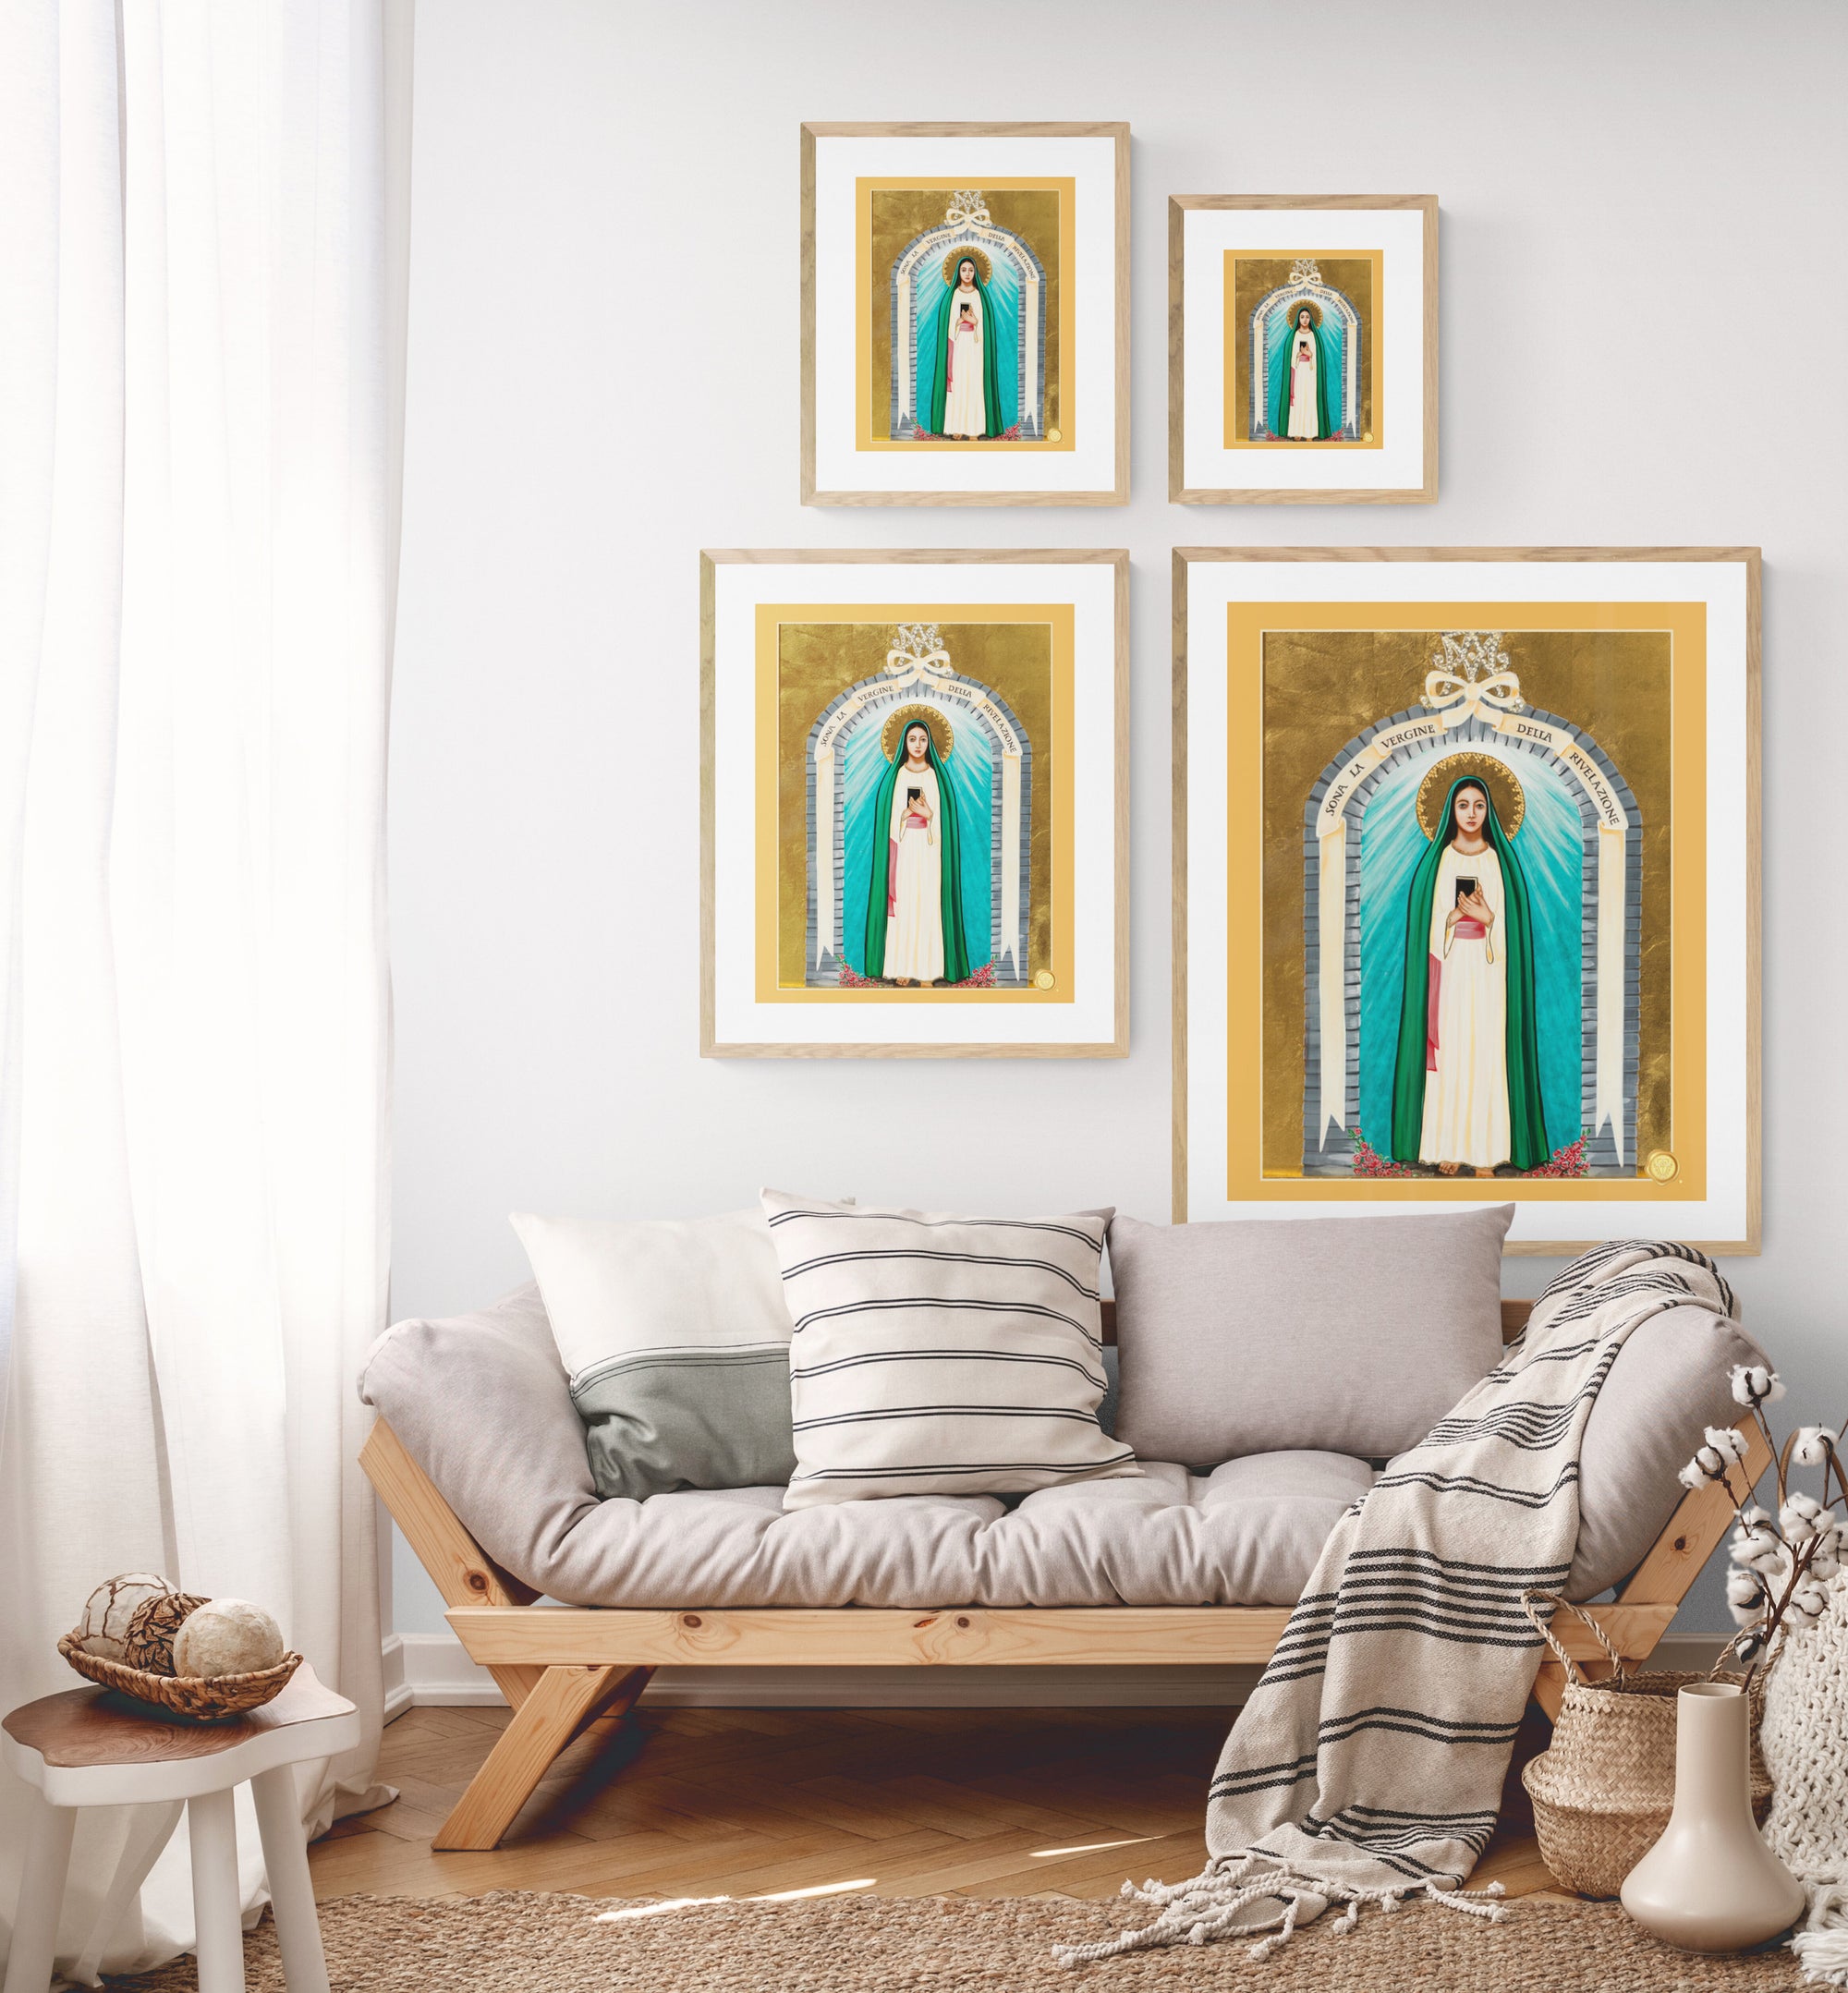 Our Lady of Revelation Icon Print